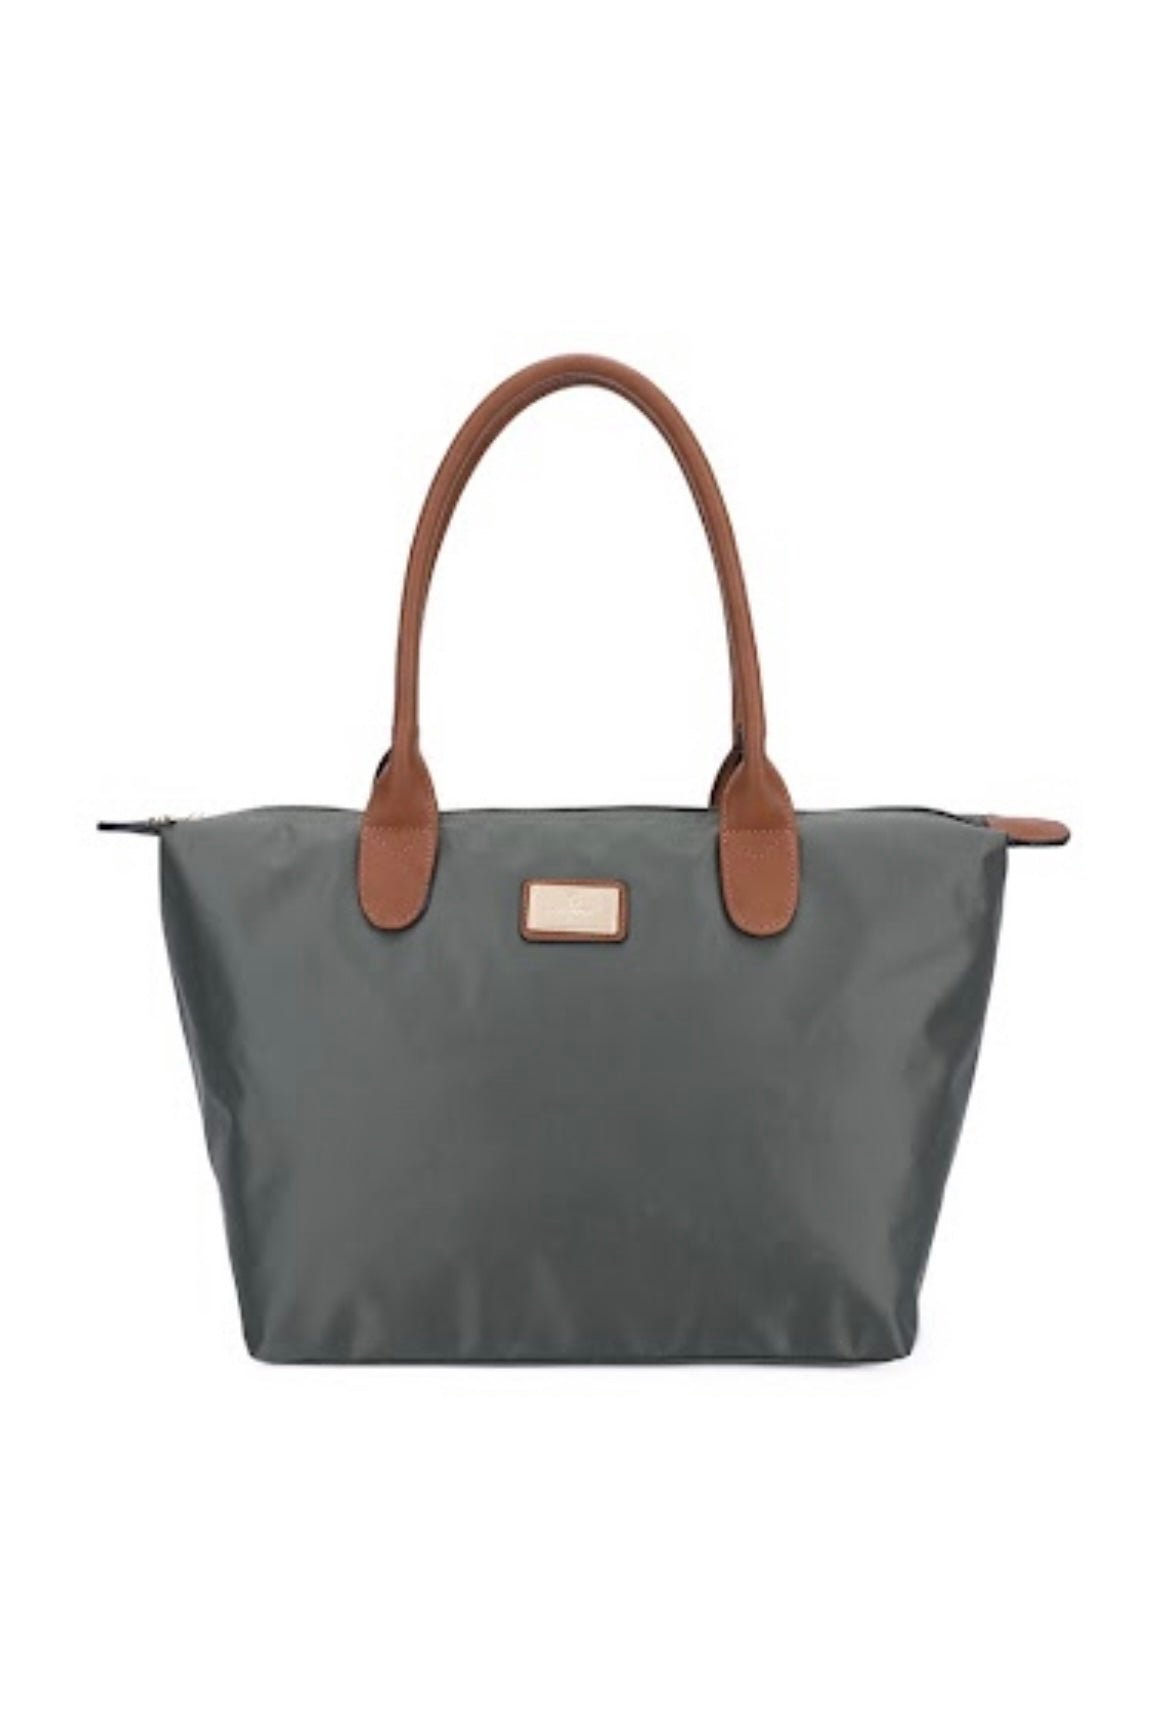 ♥︎STOCKHOLM BAG ARMY GREEN - My Favourites